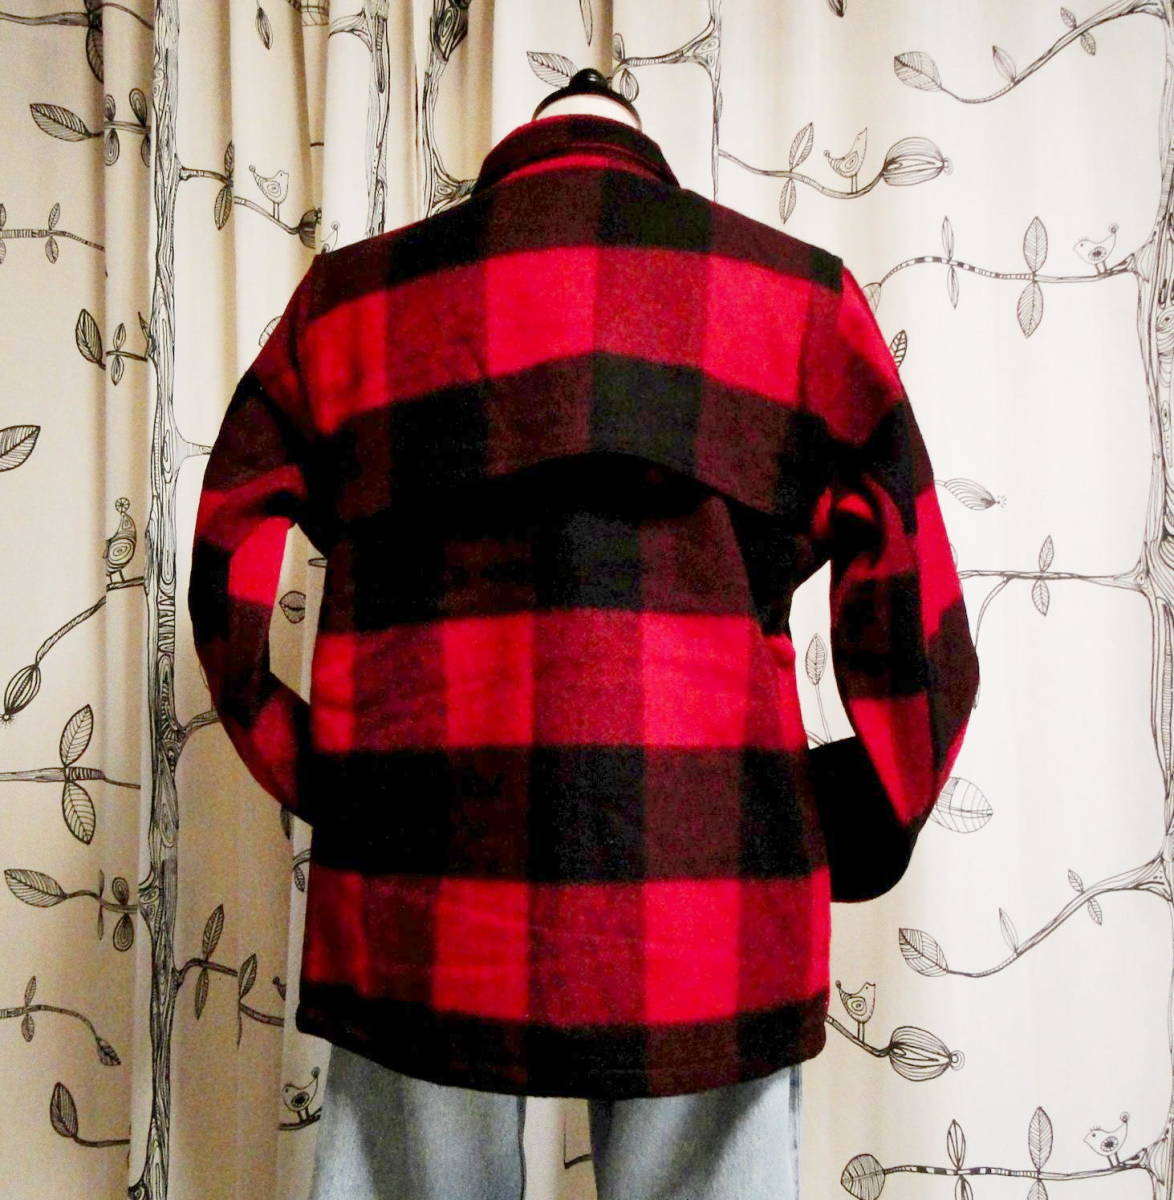 90's WoolRich ウールリッチ スタッグジャケット Made in U.S.A. バッファローチェック Dead stock・送料込